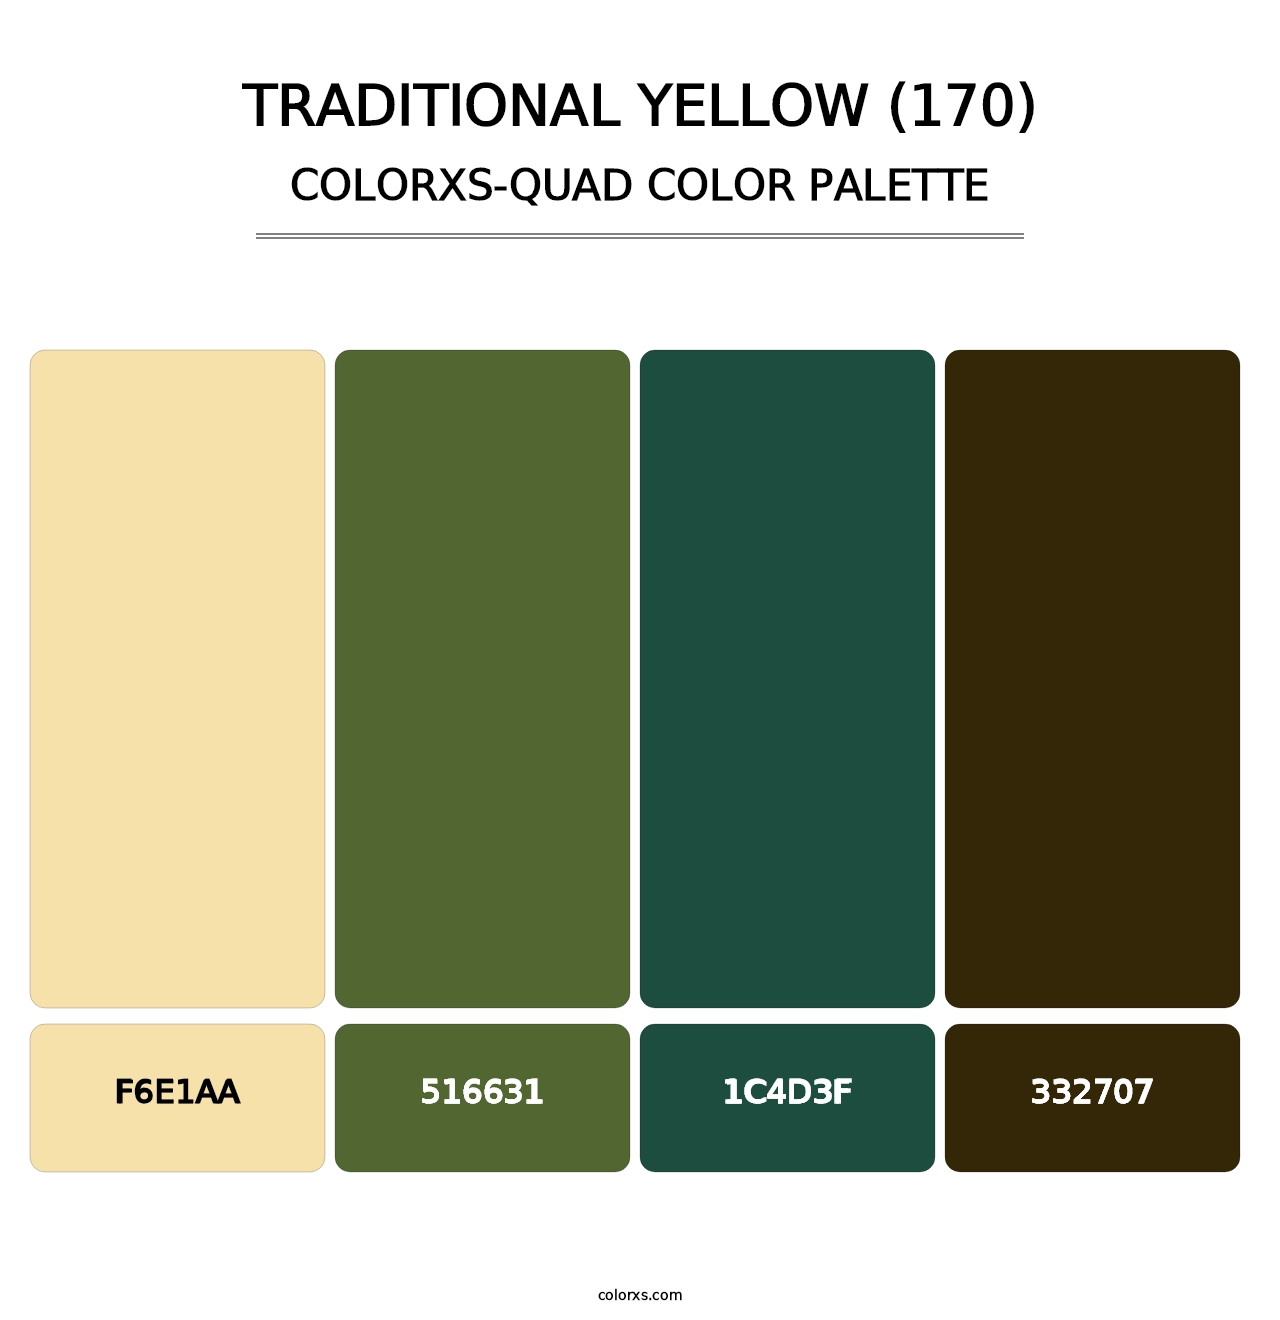 Traditional Yellow (170) - Colorxs Quad Palette